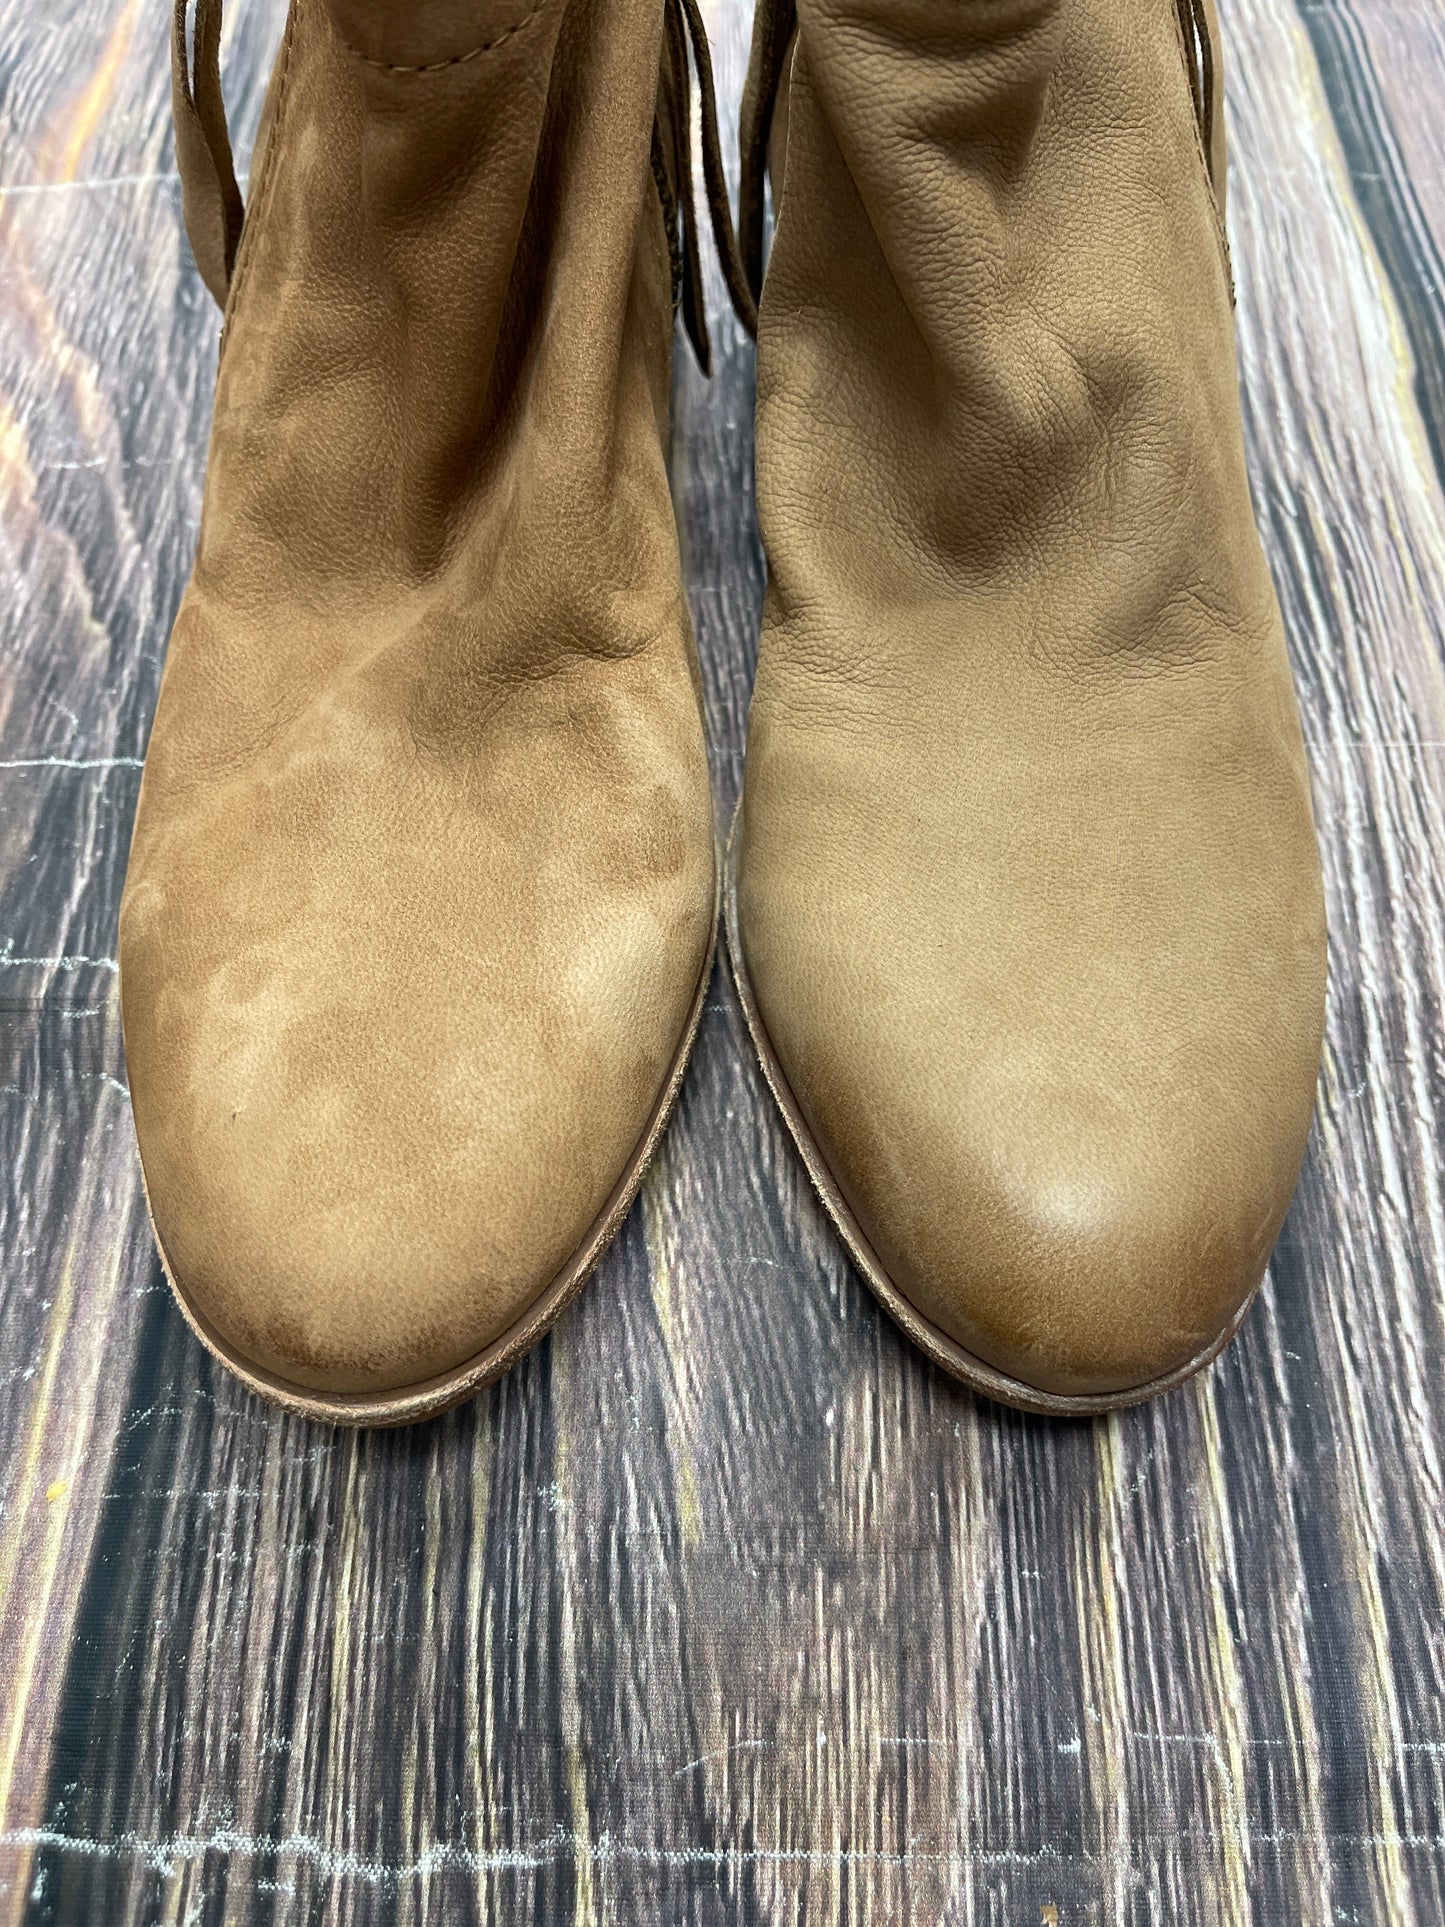 Boots Ankle Heels By Sam Edelman  Size: 6